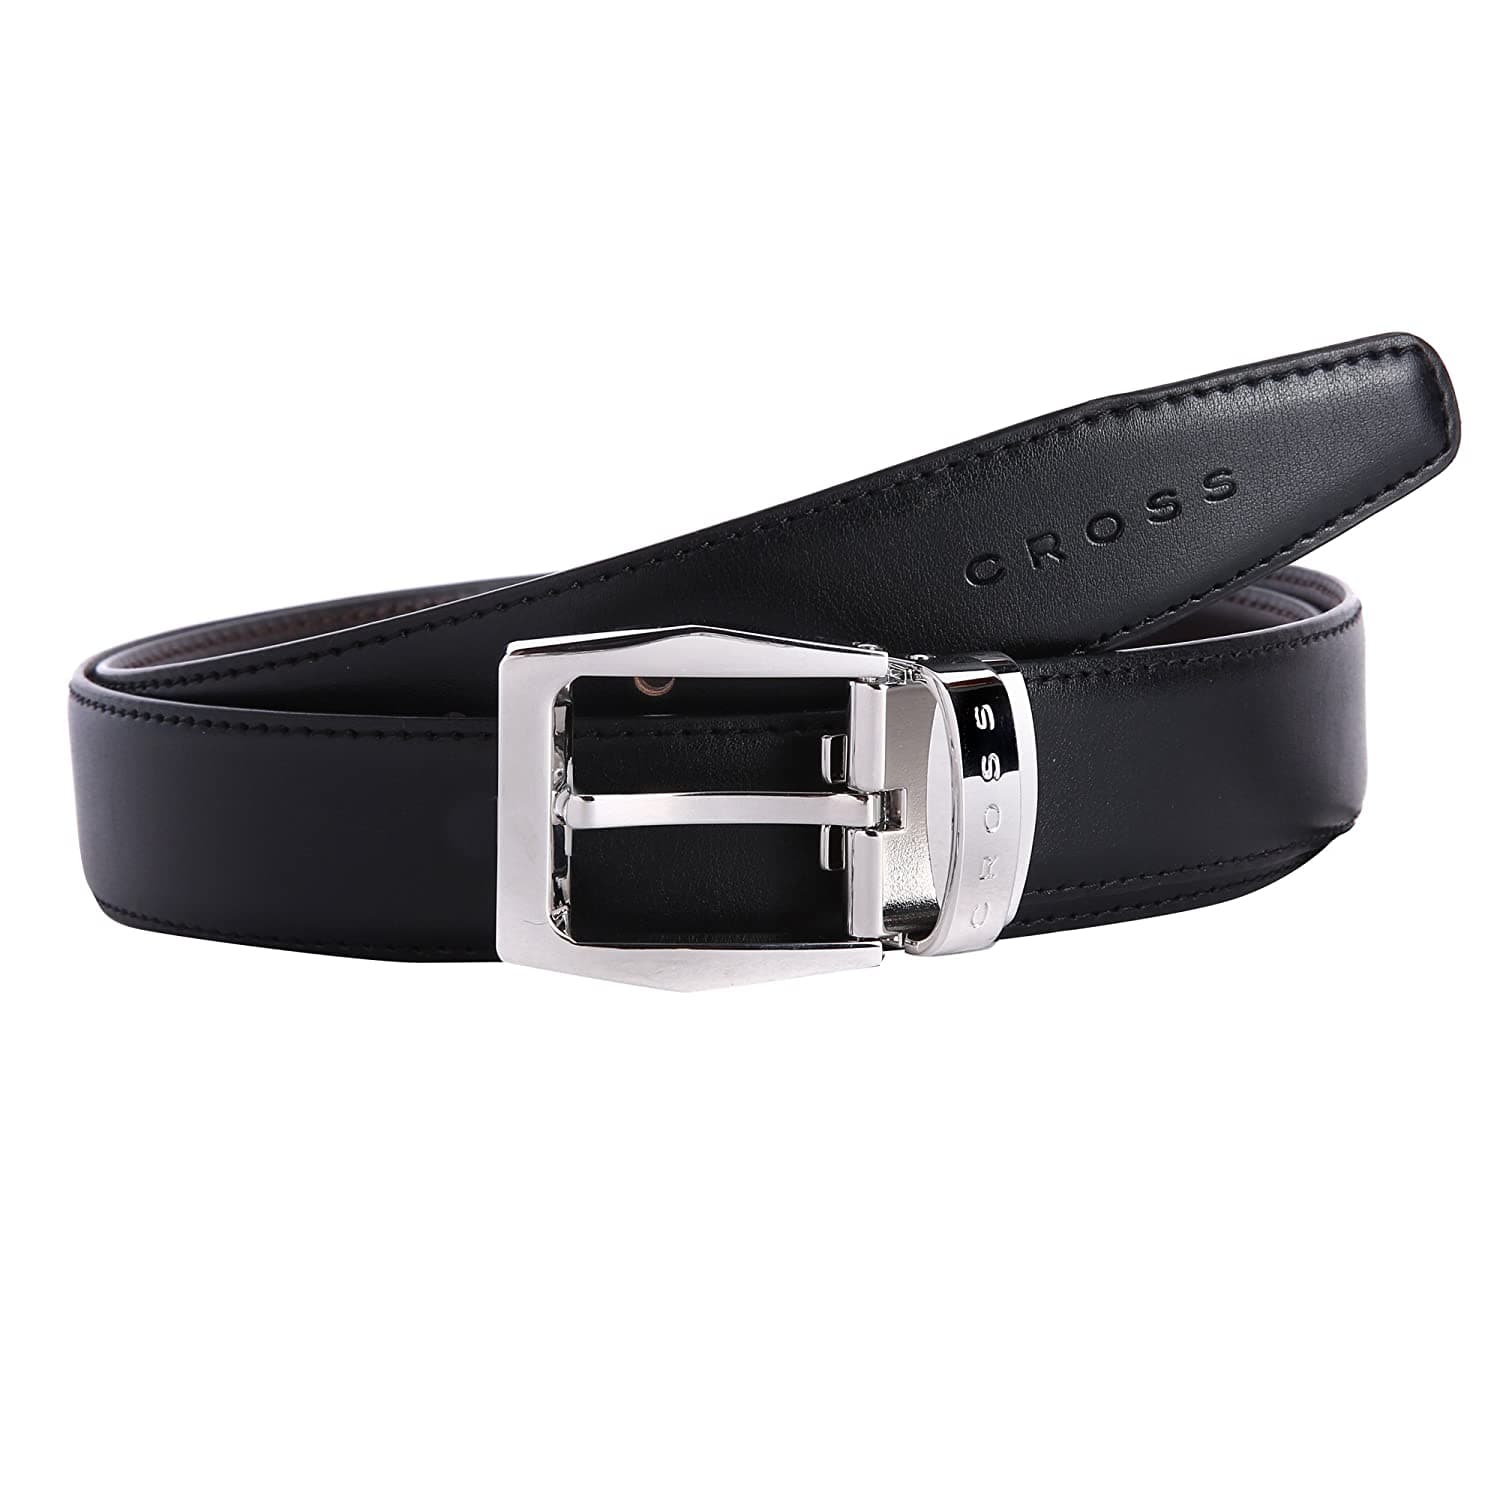 CROSS MEISTER PREMIUM LEATHER BELT WITH 30 MM PRONGED BUCKLE FOR MEN L (92CM) - BLACK AND BROWN - AC1298198-2-L2